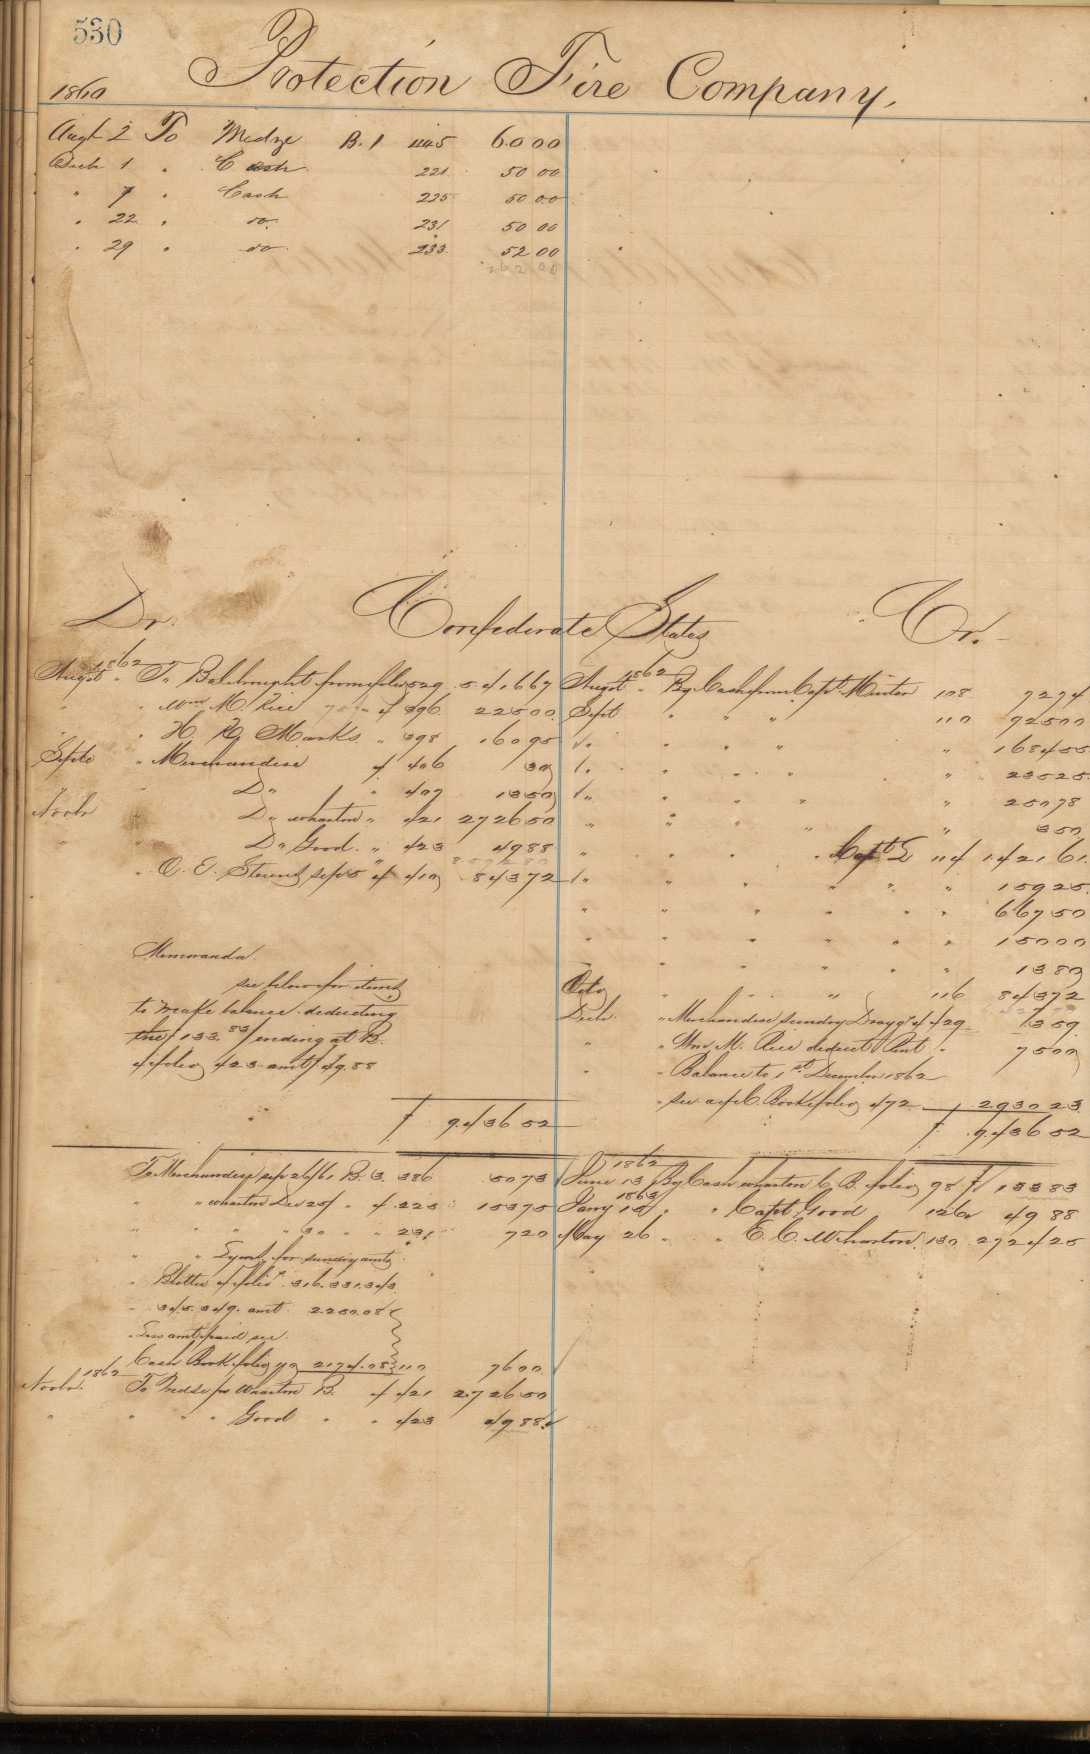 Excerpt from William Marsh Rice business and estate ledgers, Old Business 1859-1862, UA 102